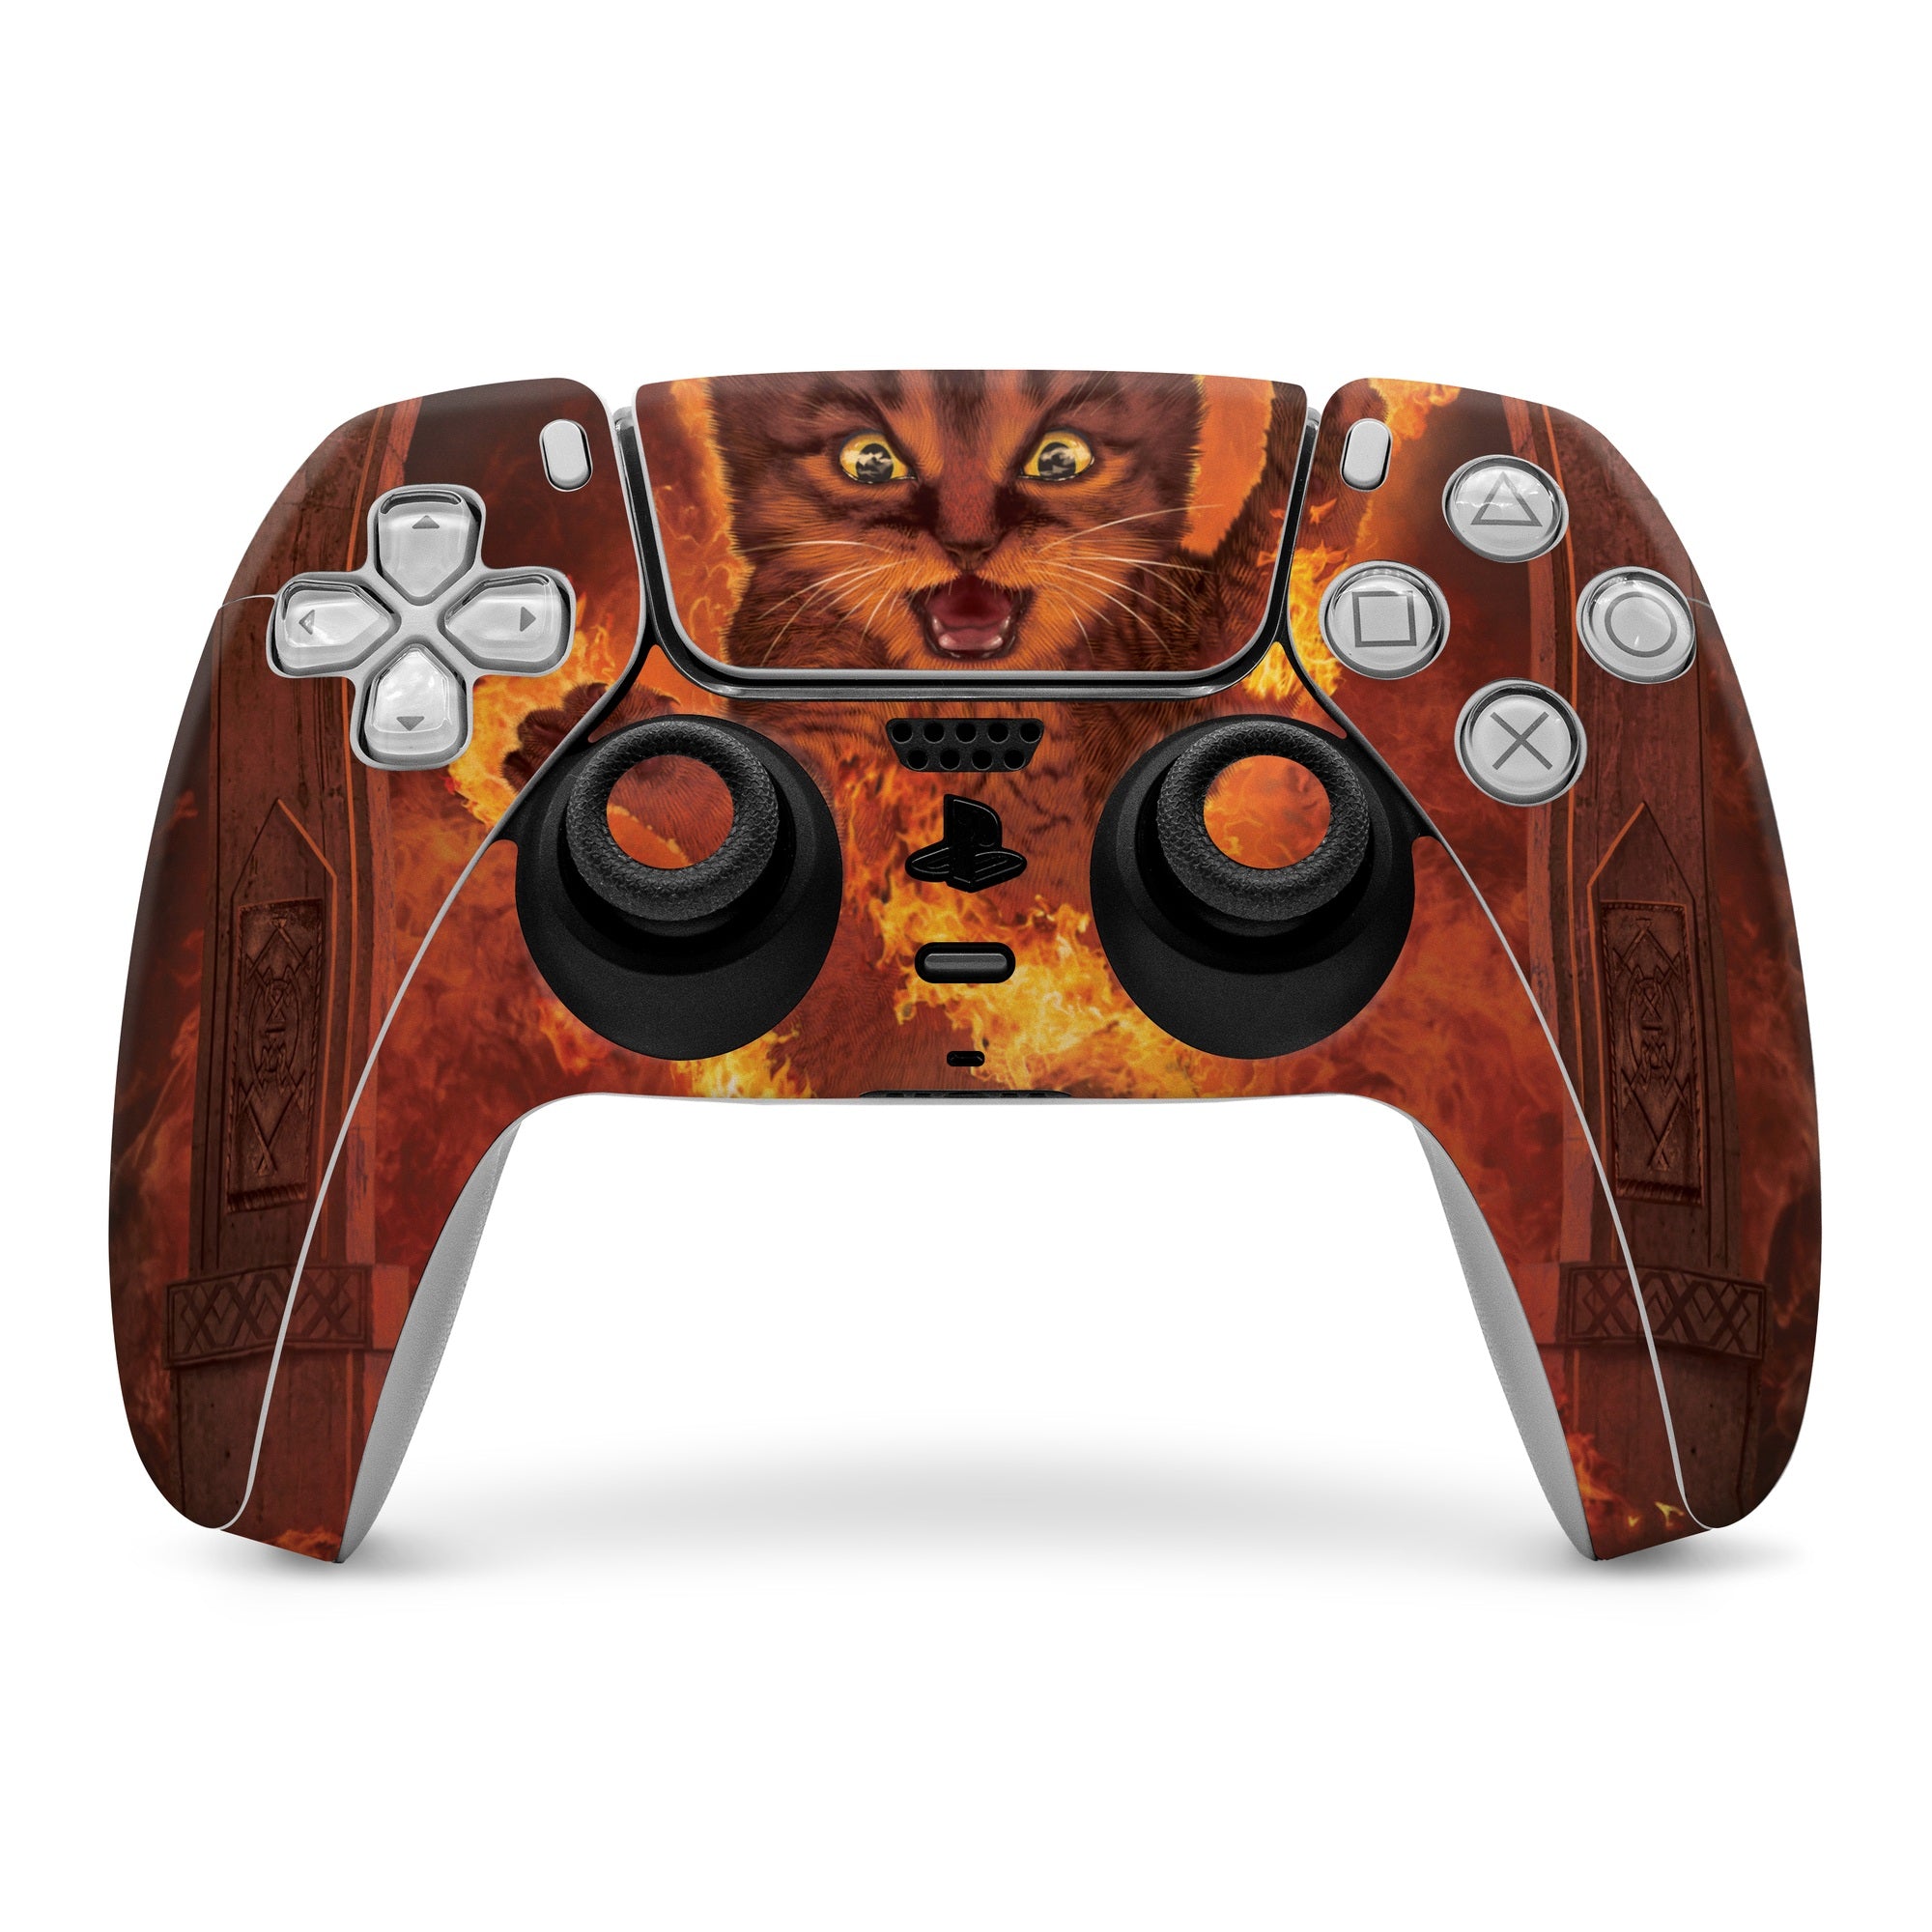 You Shall Not Pass - Sony PS5 Controller Skin